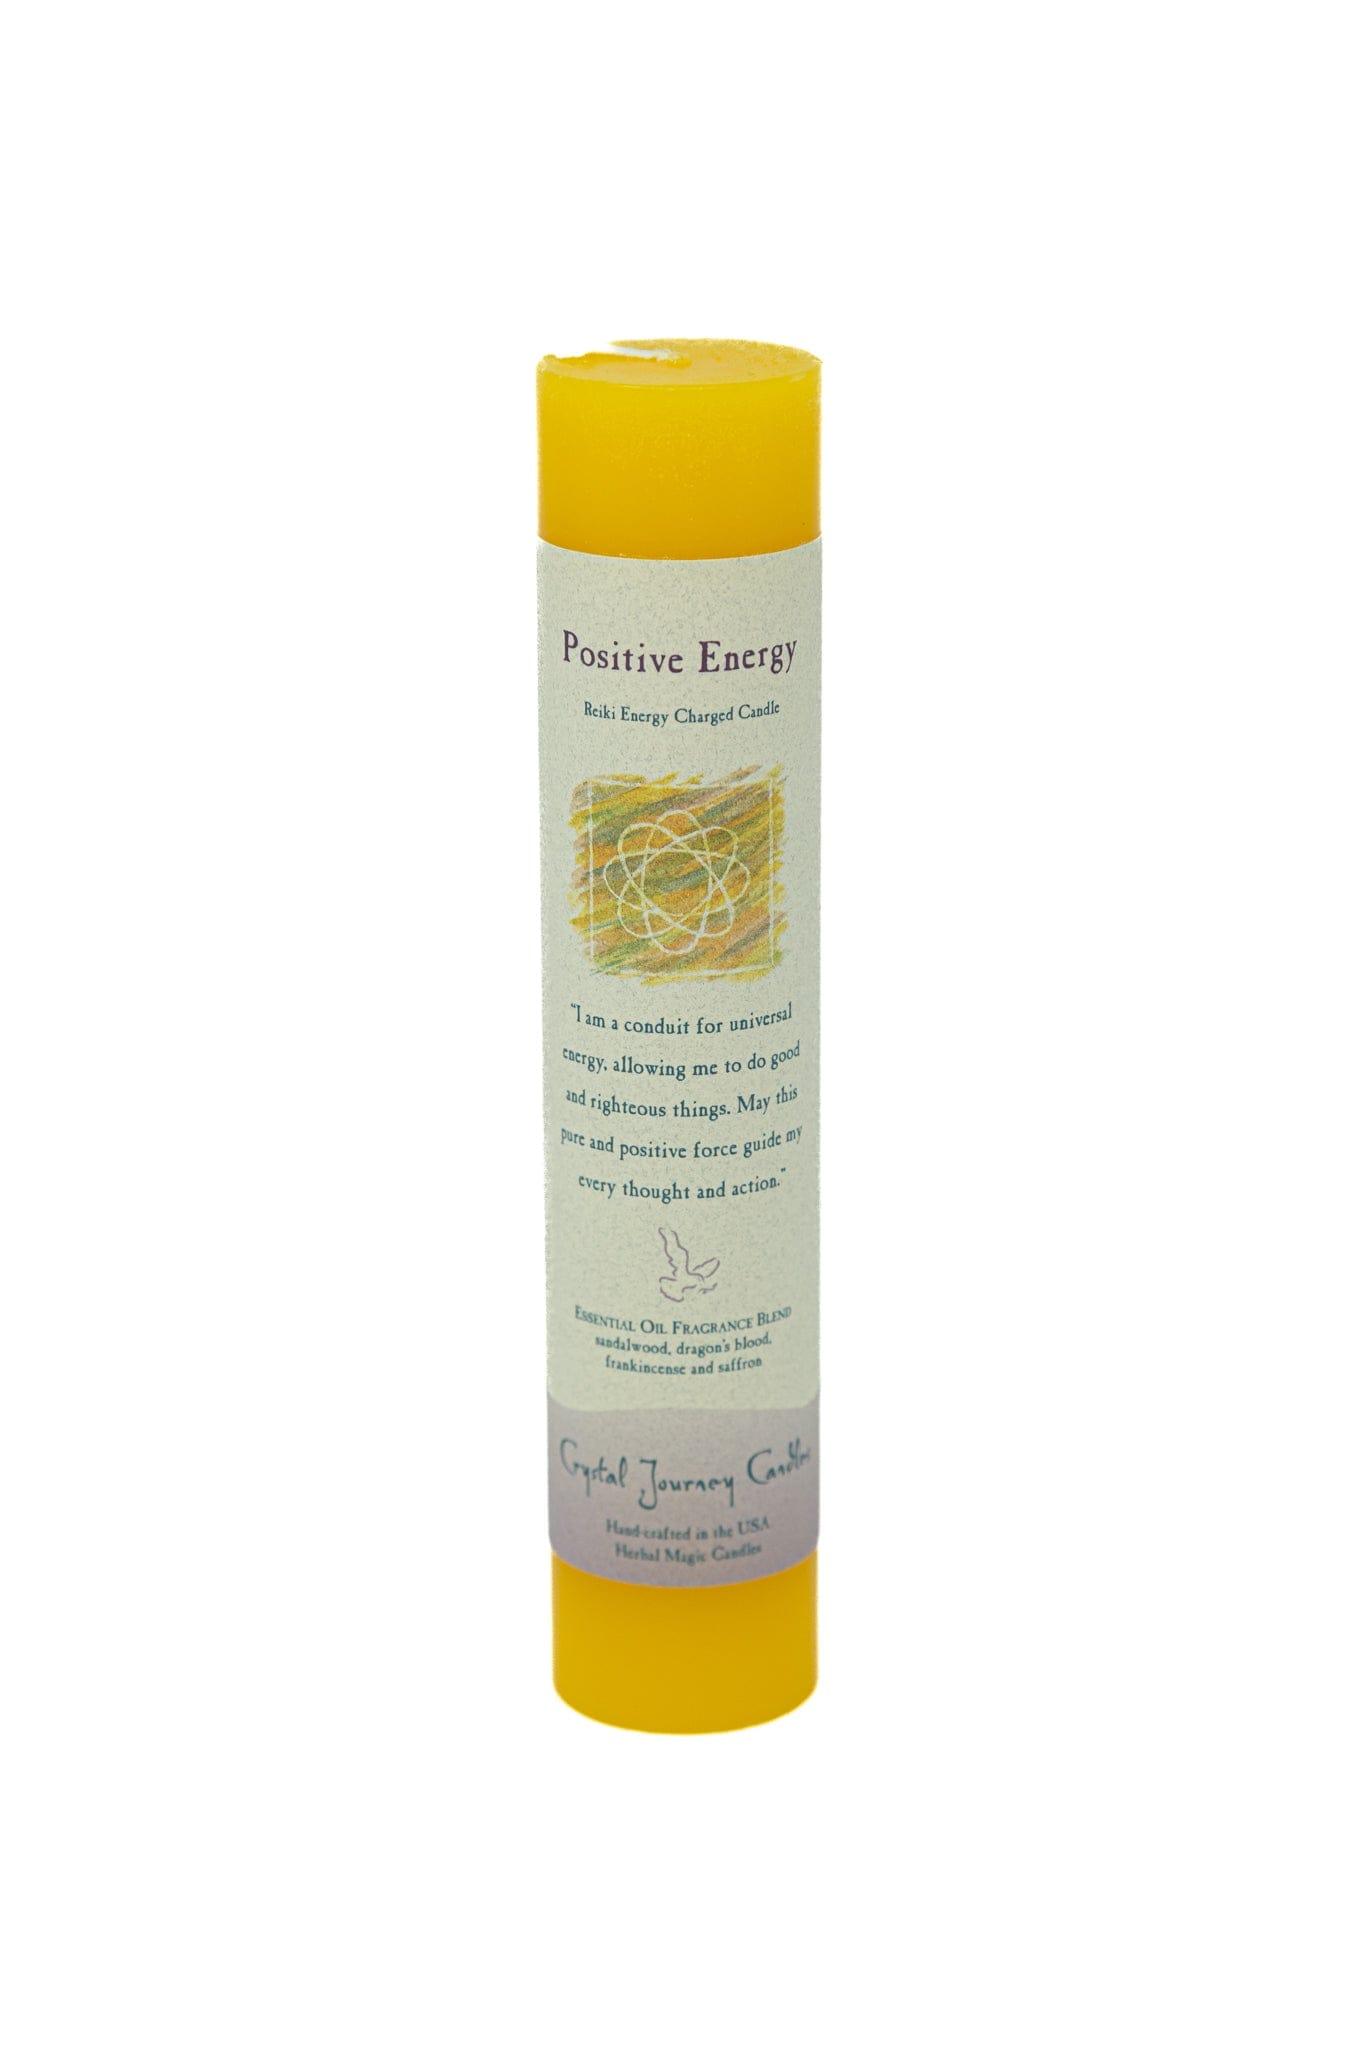 Crystal Journey Candles Positive Energy Candles